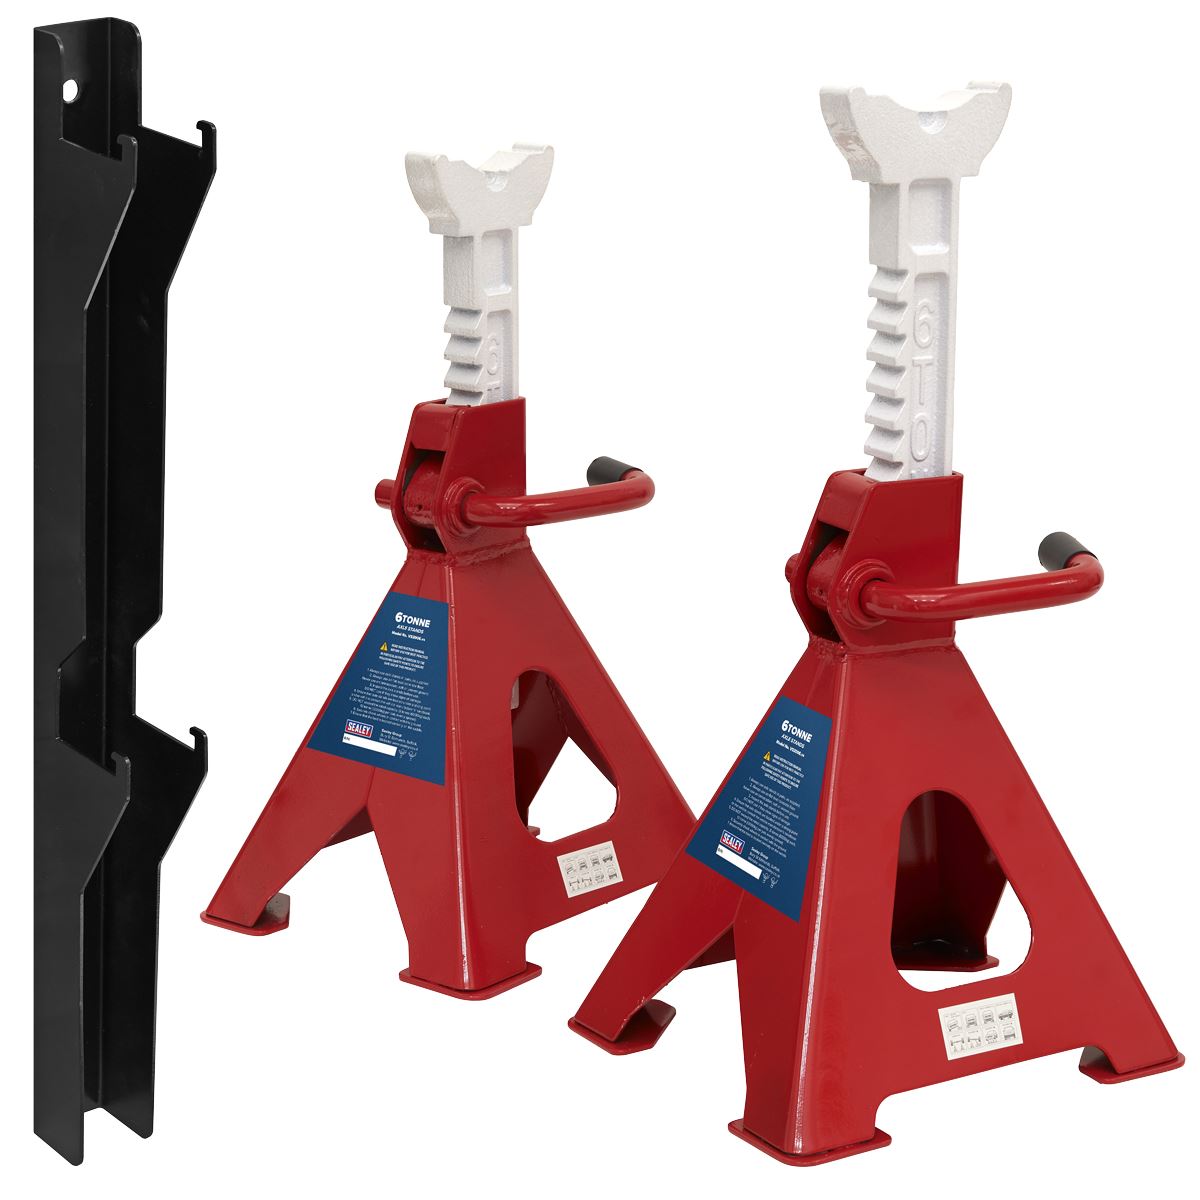 Sealey Axle Stand & Axle Stand Storage Rack Combo 6 Tonne